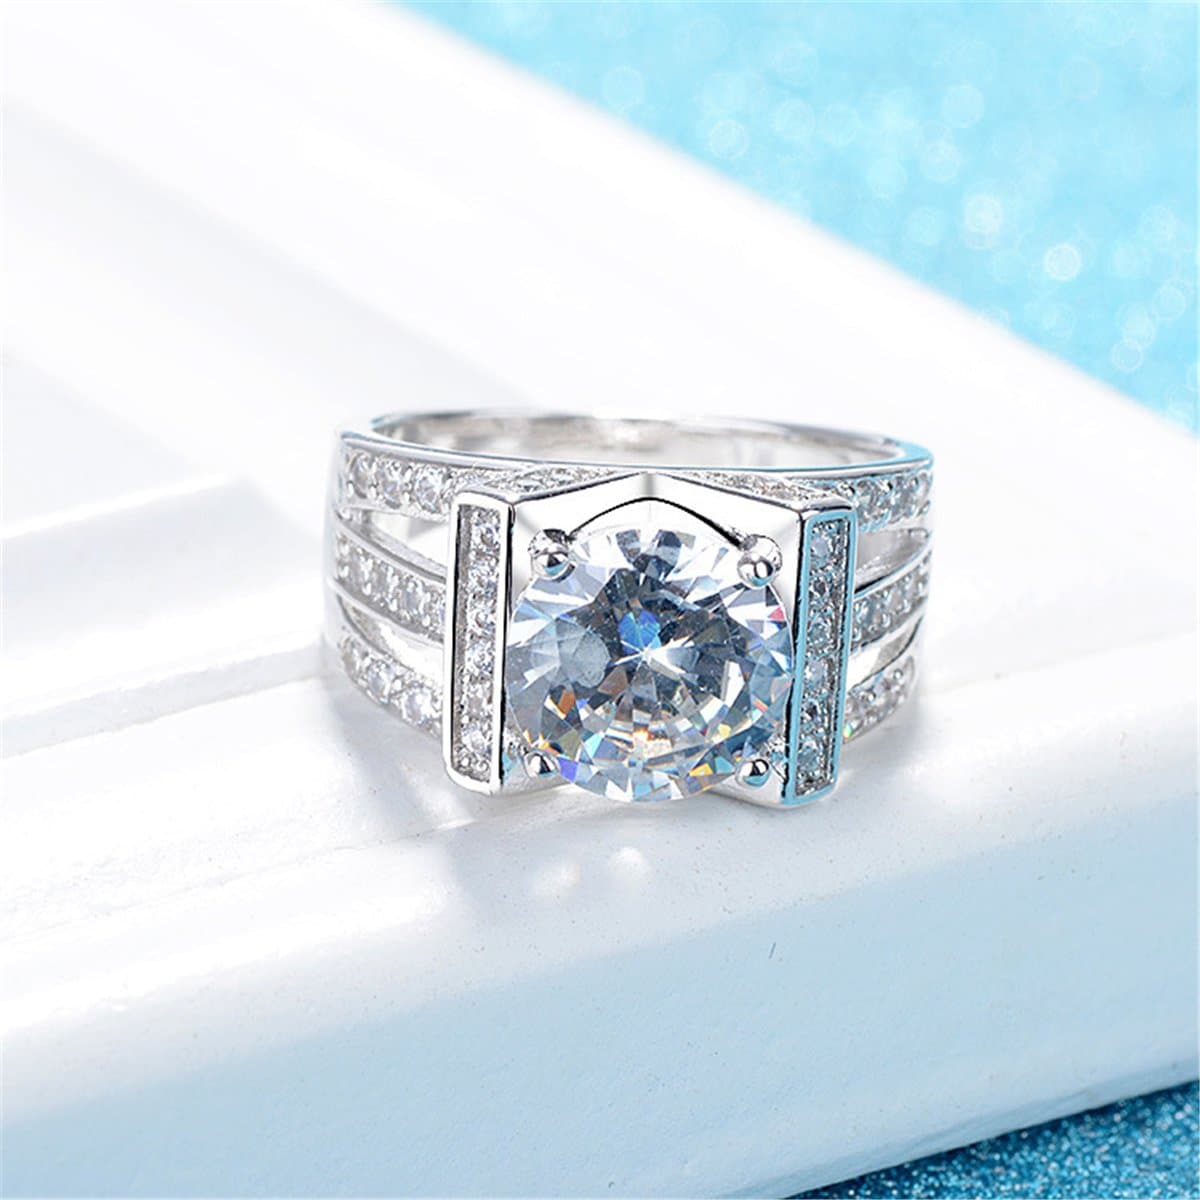 Clear Round Crystal & Cubic Zirconia Silver-Plated Ring